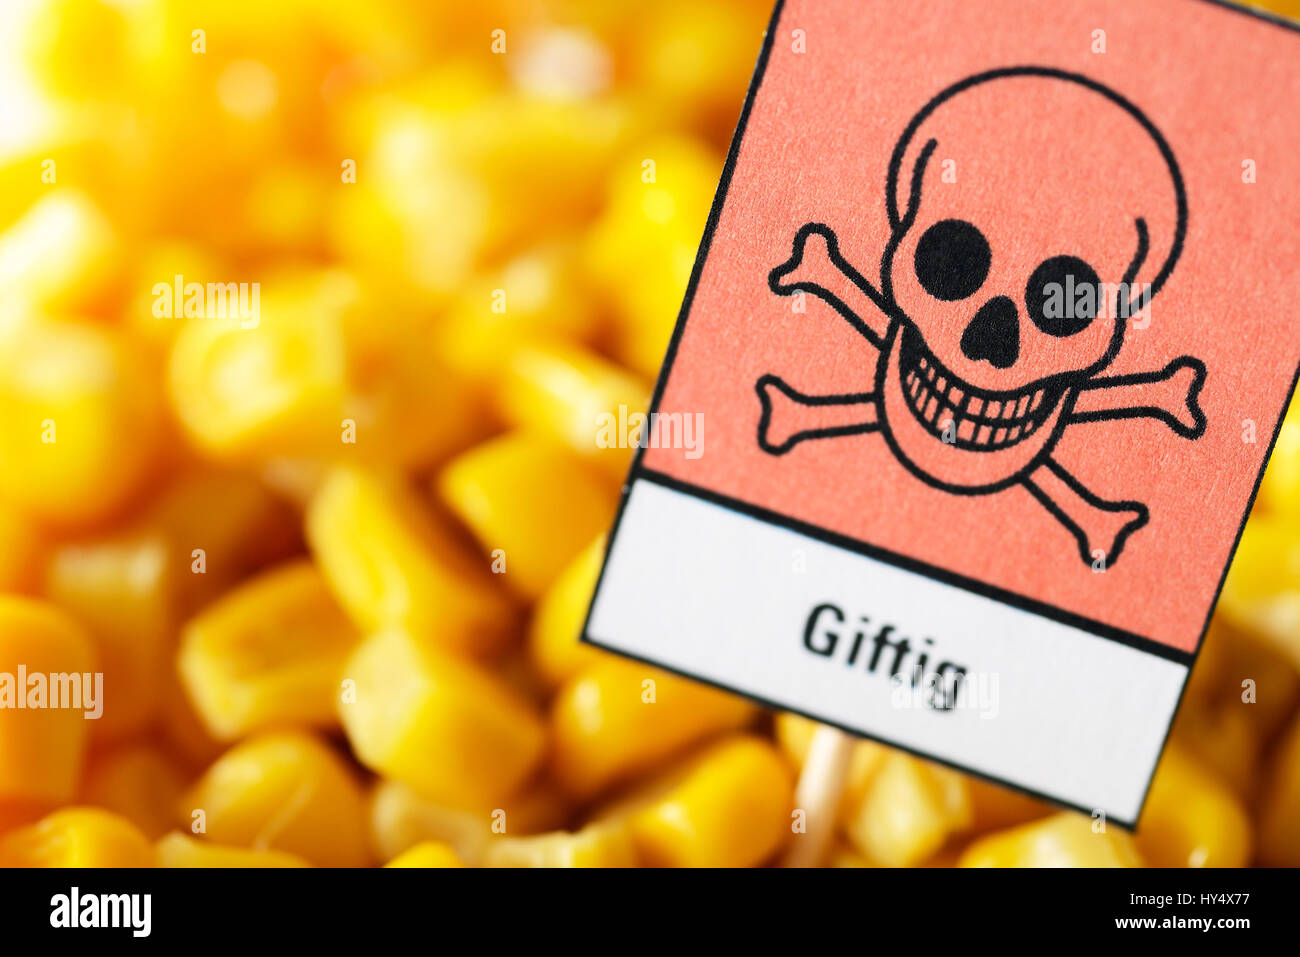 Maize with poison sign, feed scandal, Mais mit Gift-Zeichen, Futtermittelskandal Stock Photo